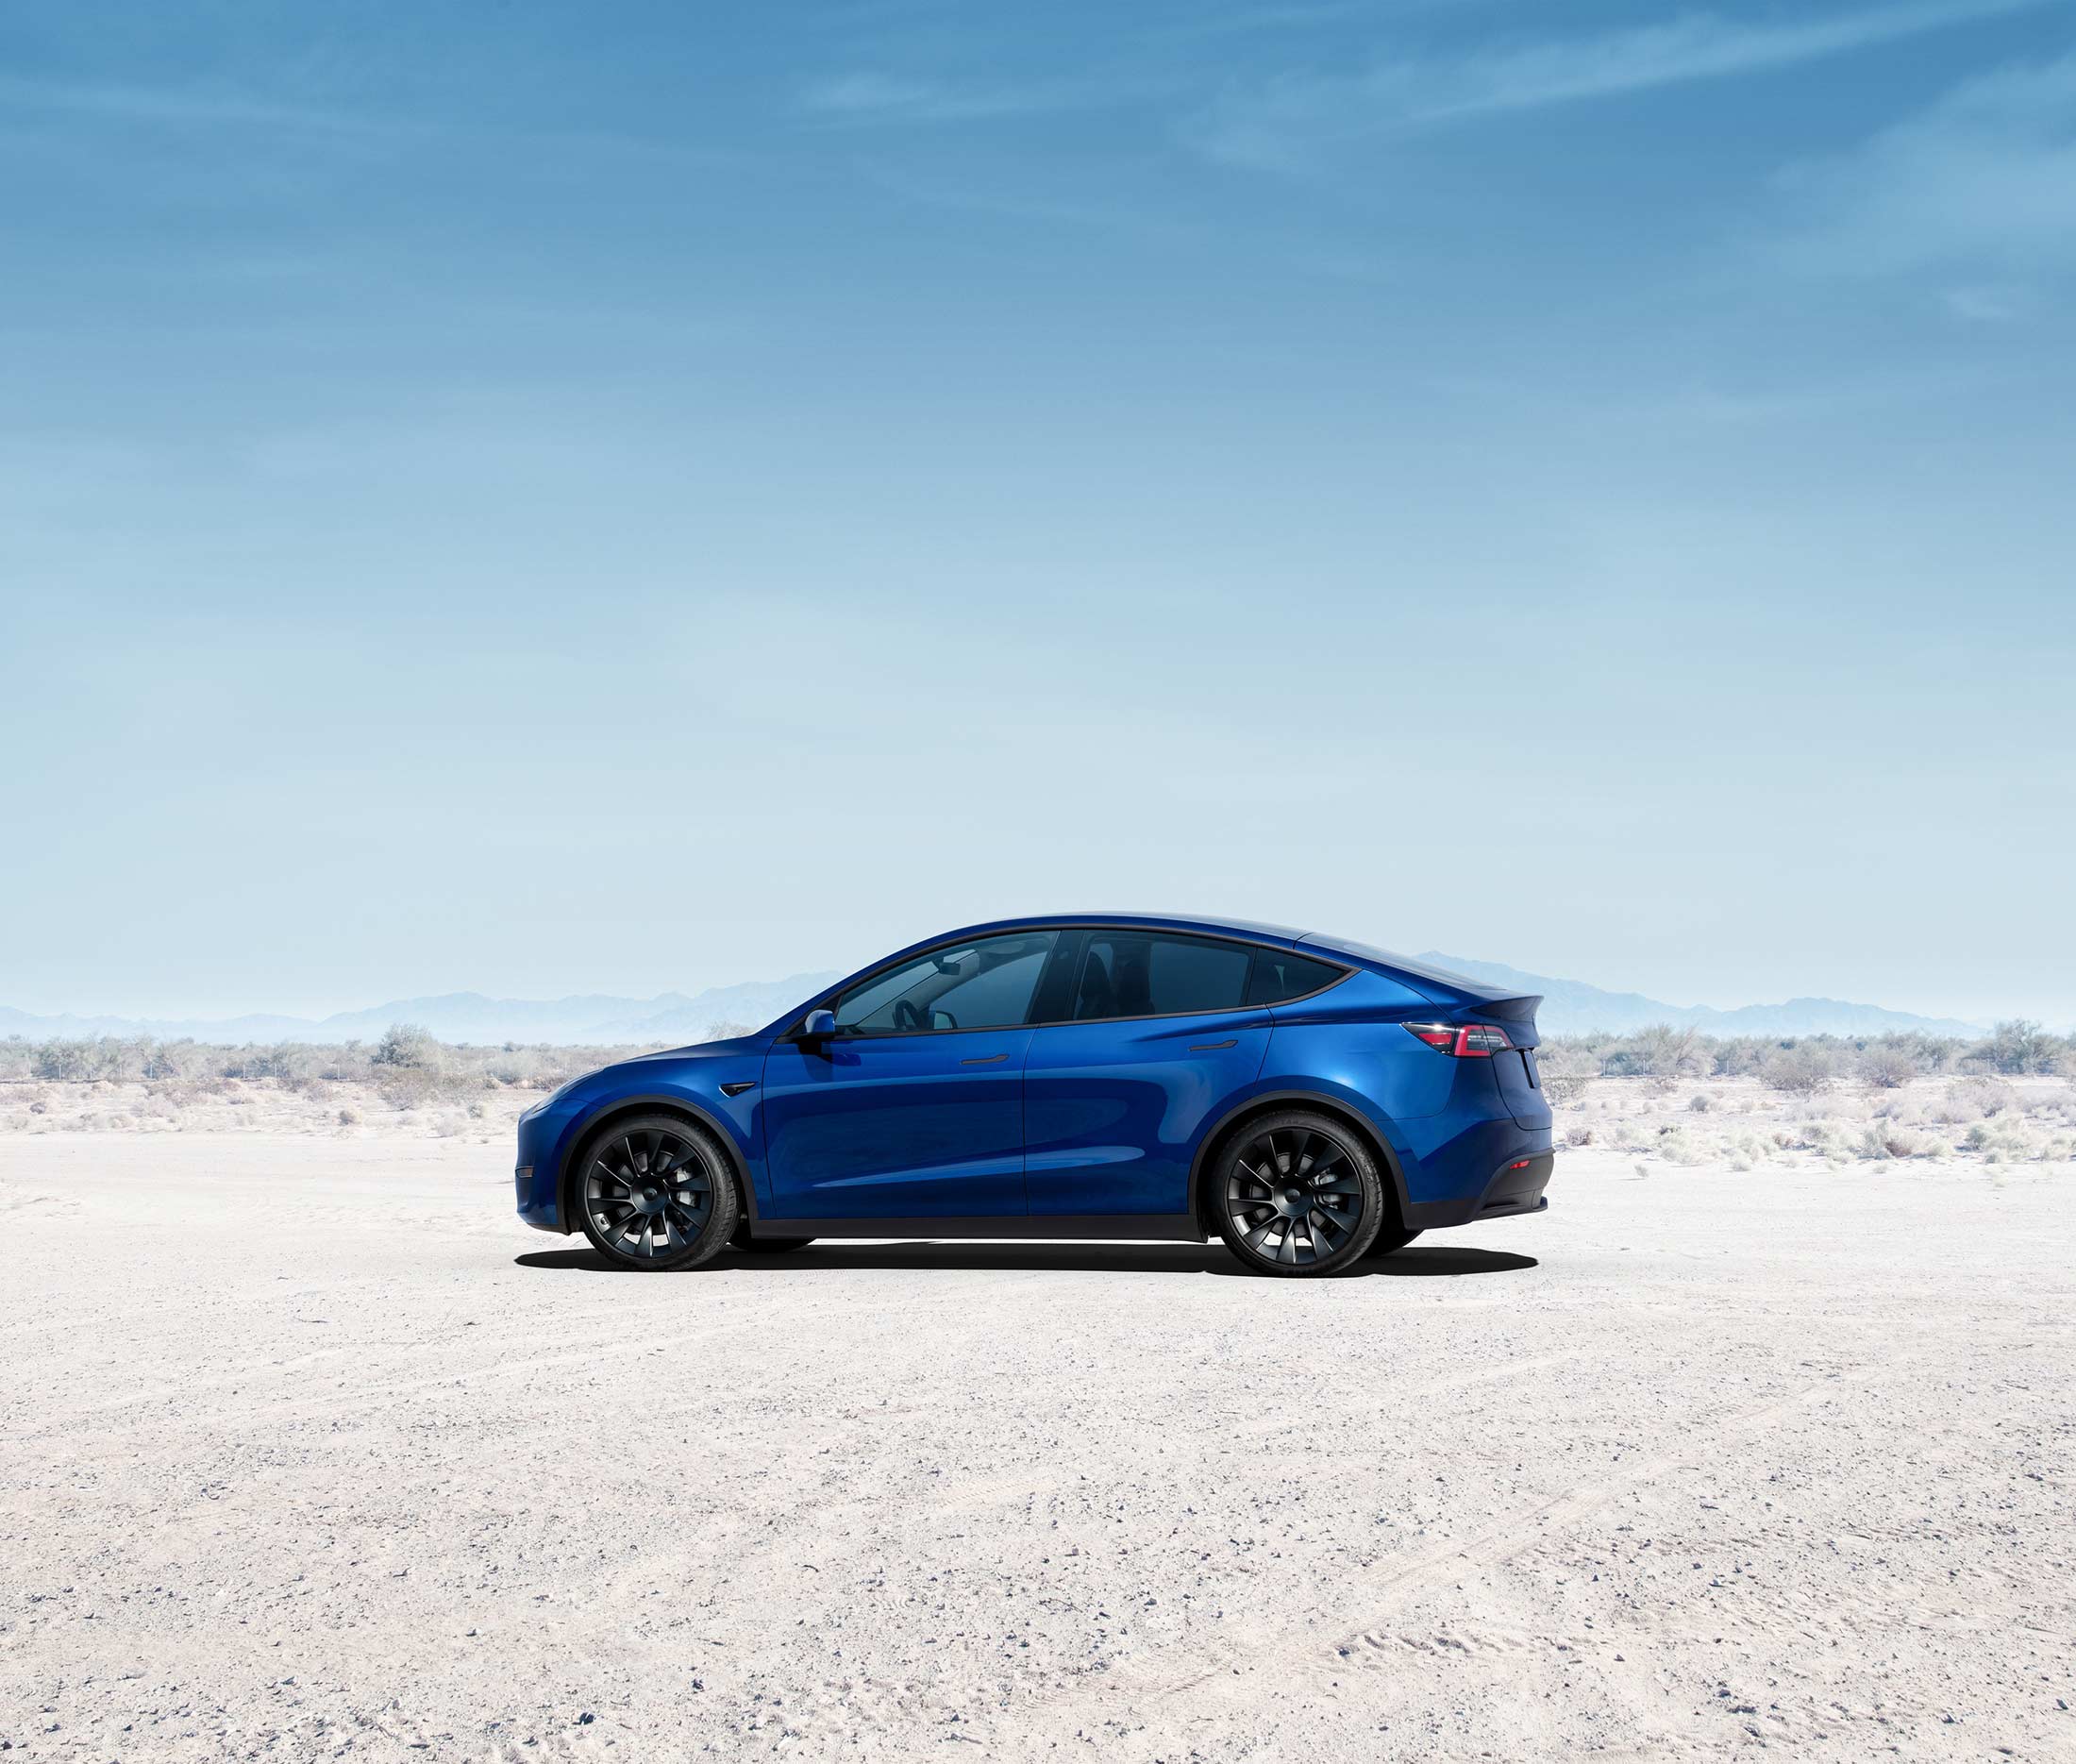 Tesla Model Y review: Dynamic E-SUV for two target groups